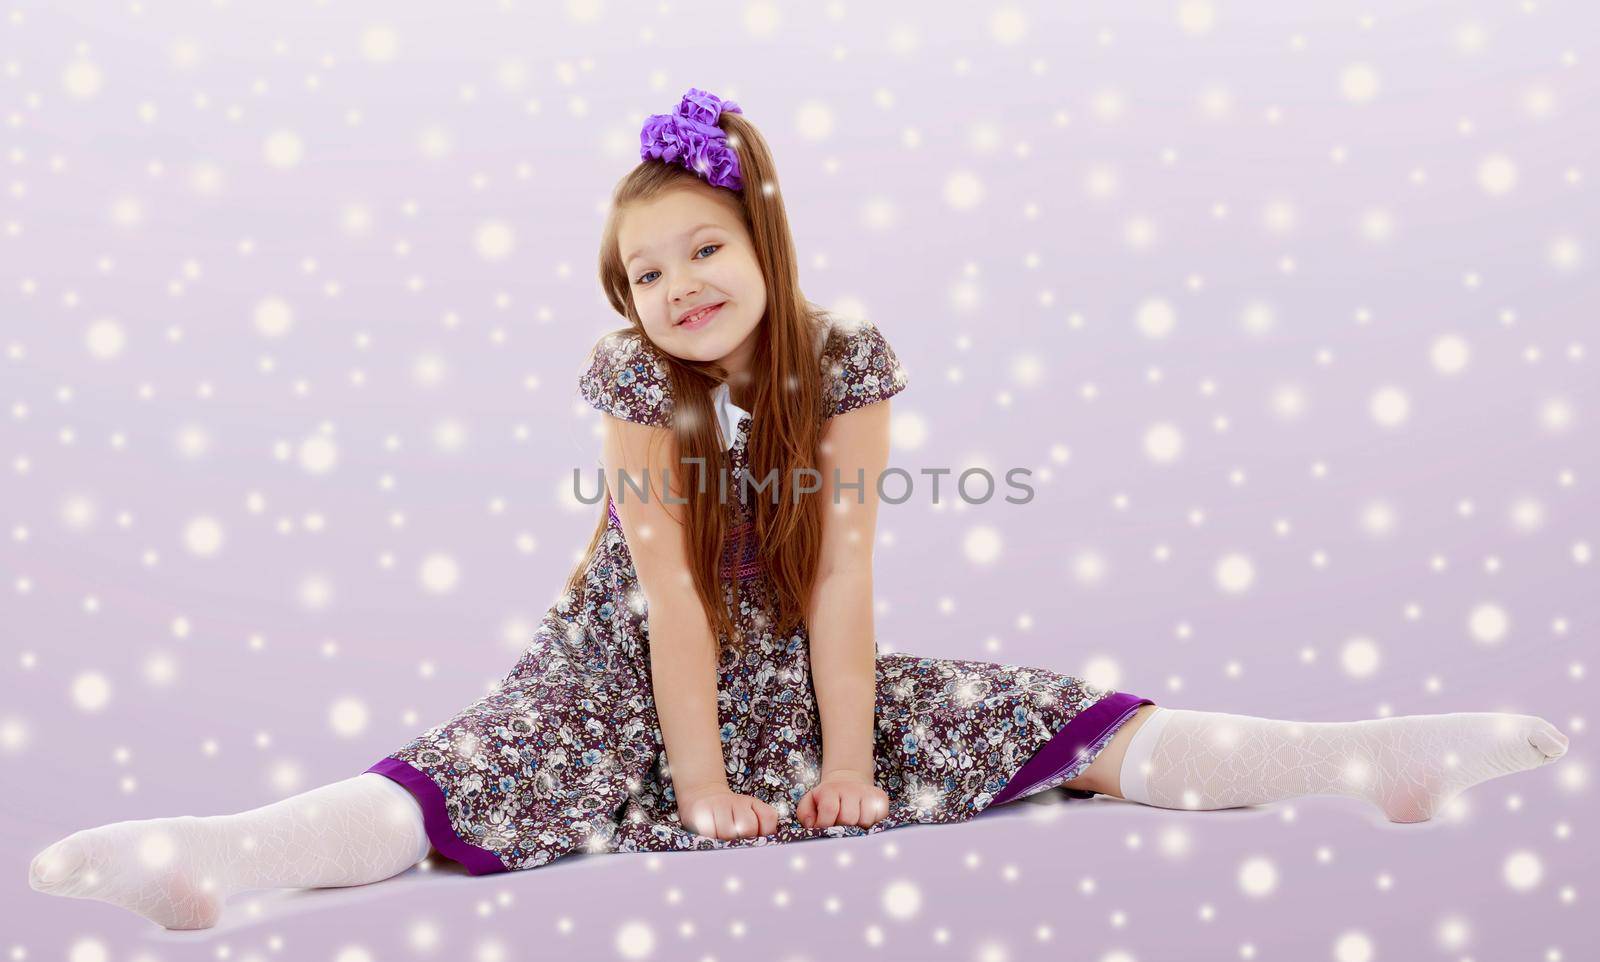 On the Christmas background with white snowflakes.Caucasian little girl with a big purple bow on her head. Girl shows how to do the splits.